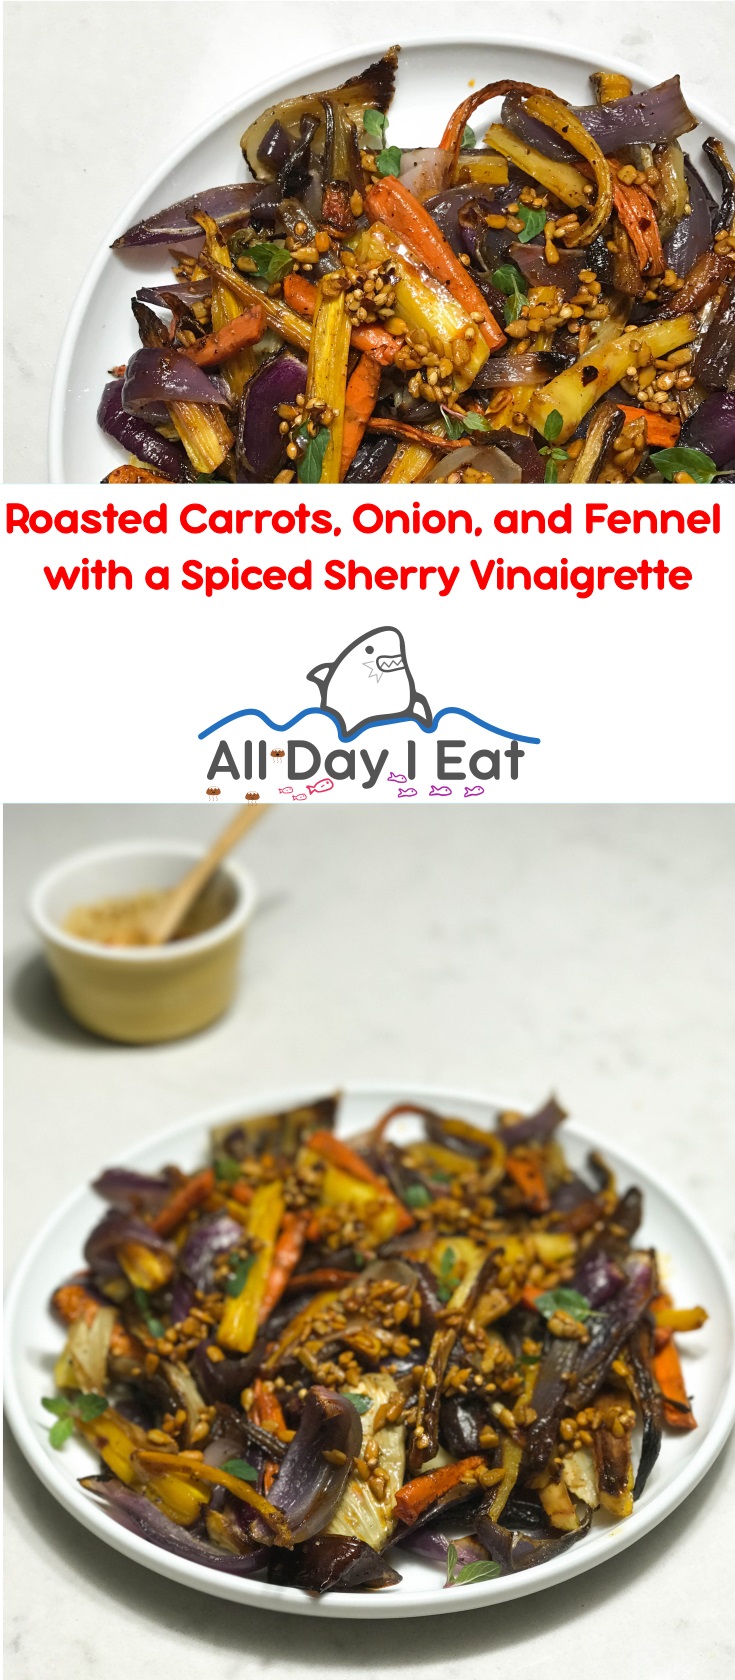 Roasted Carrots, Onion, and Fennel with a Spiced Sherry Vinaigrette | www.alldayieat.com